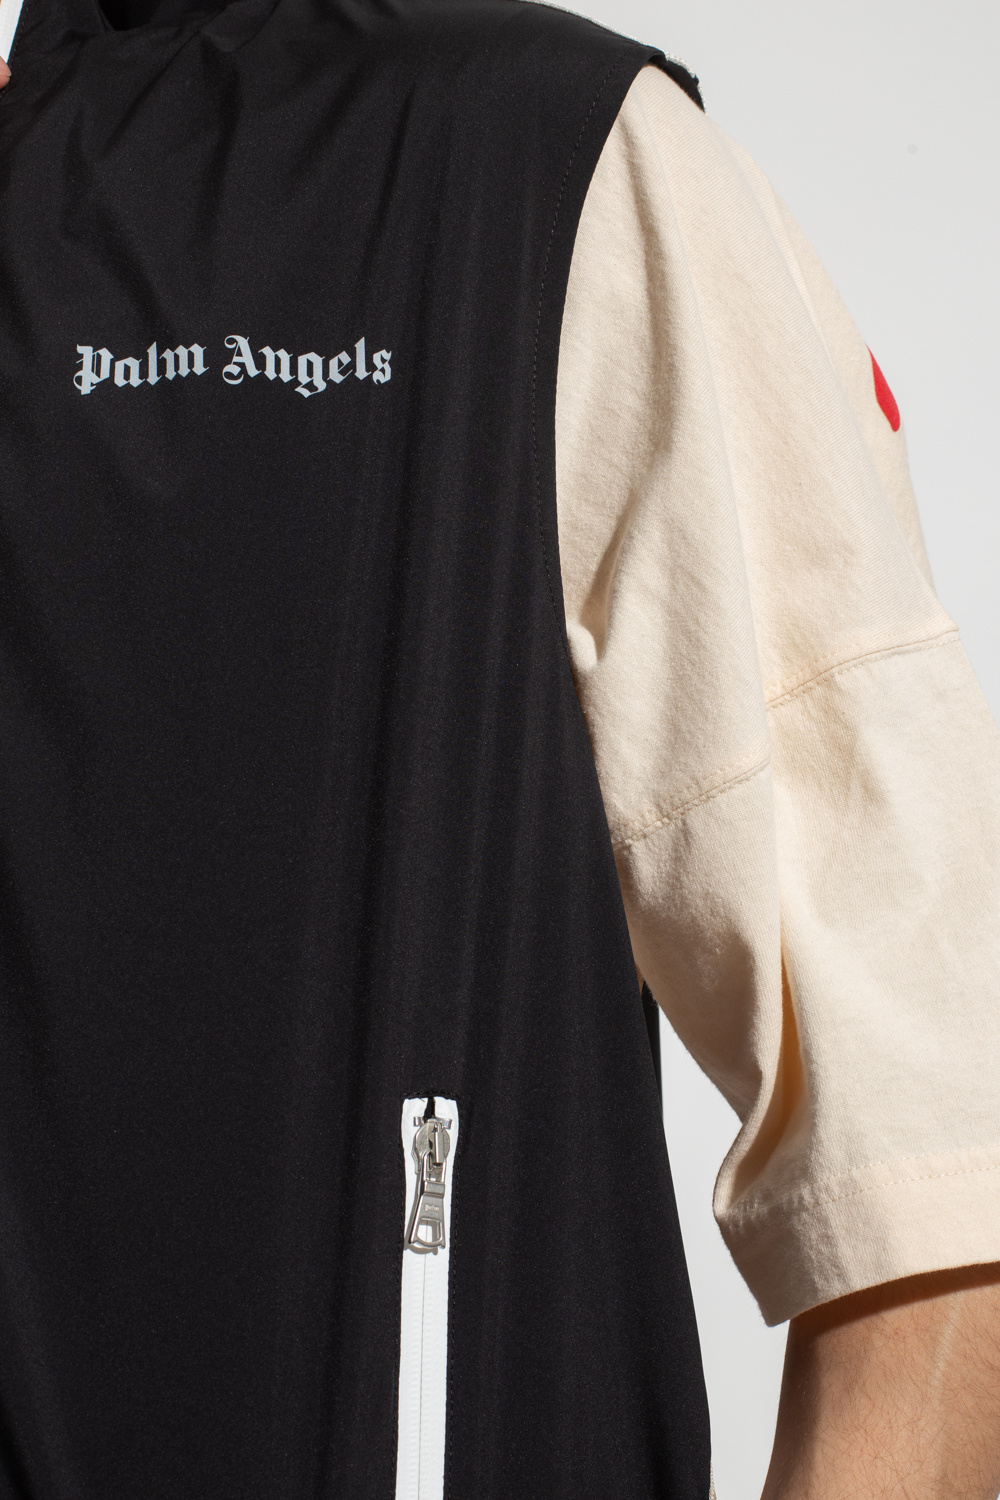 Palm Angels Download the latest version of the app